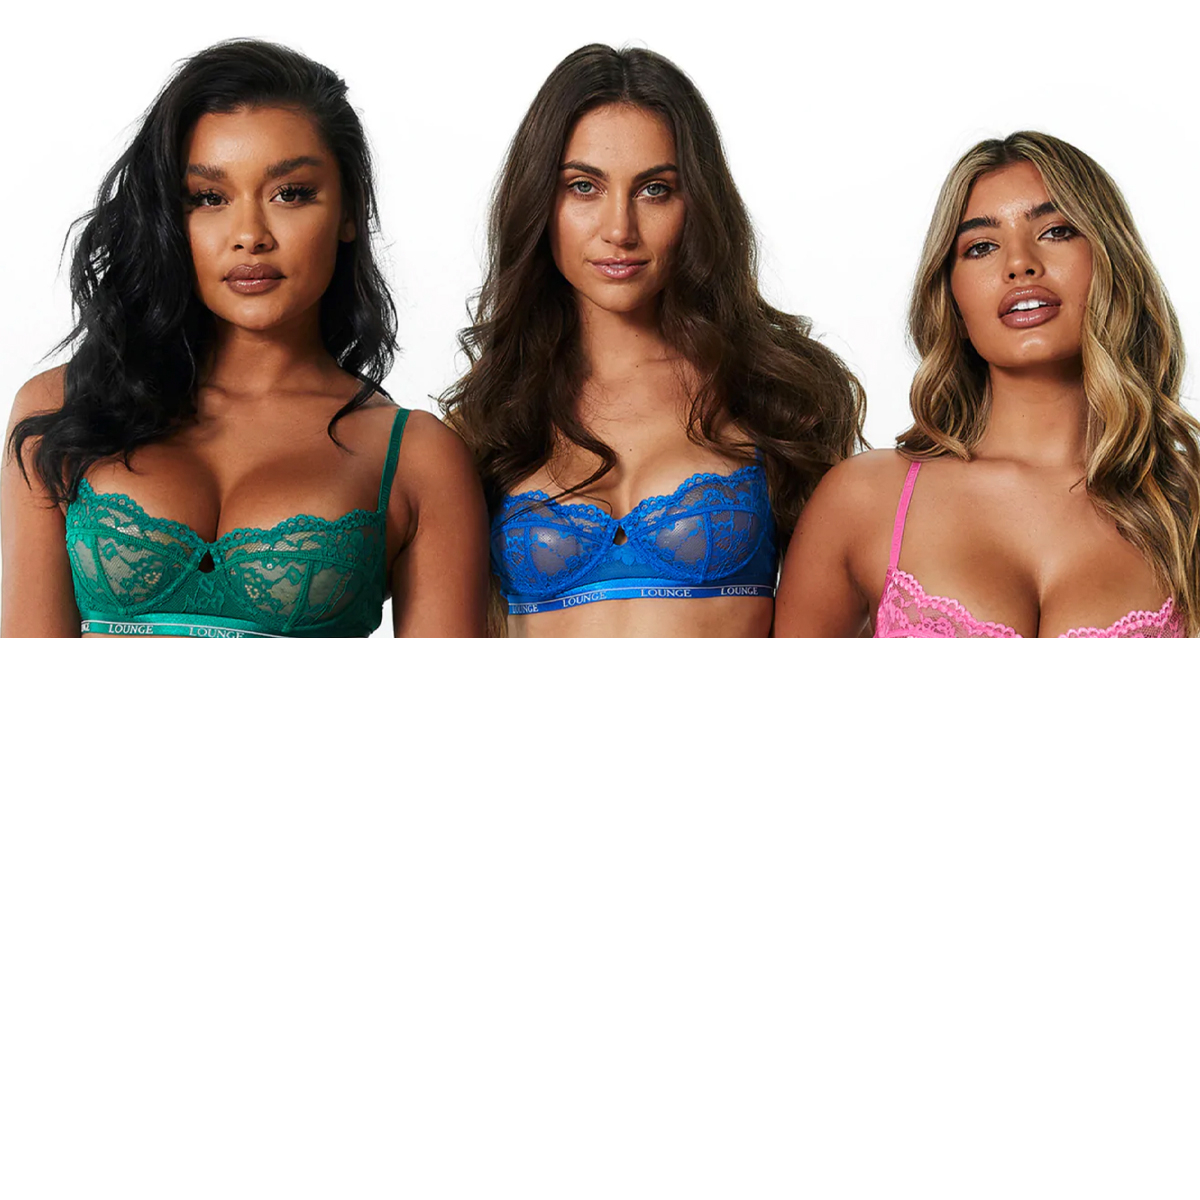 Up to 70% Off Bras on Macy's